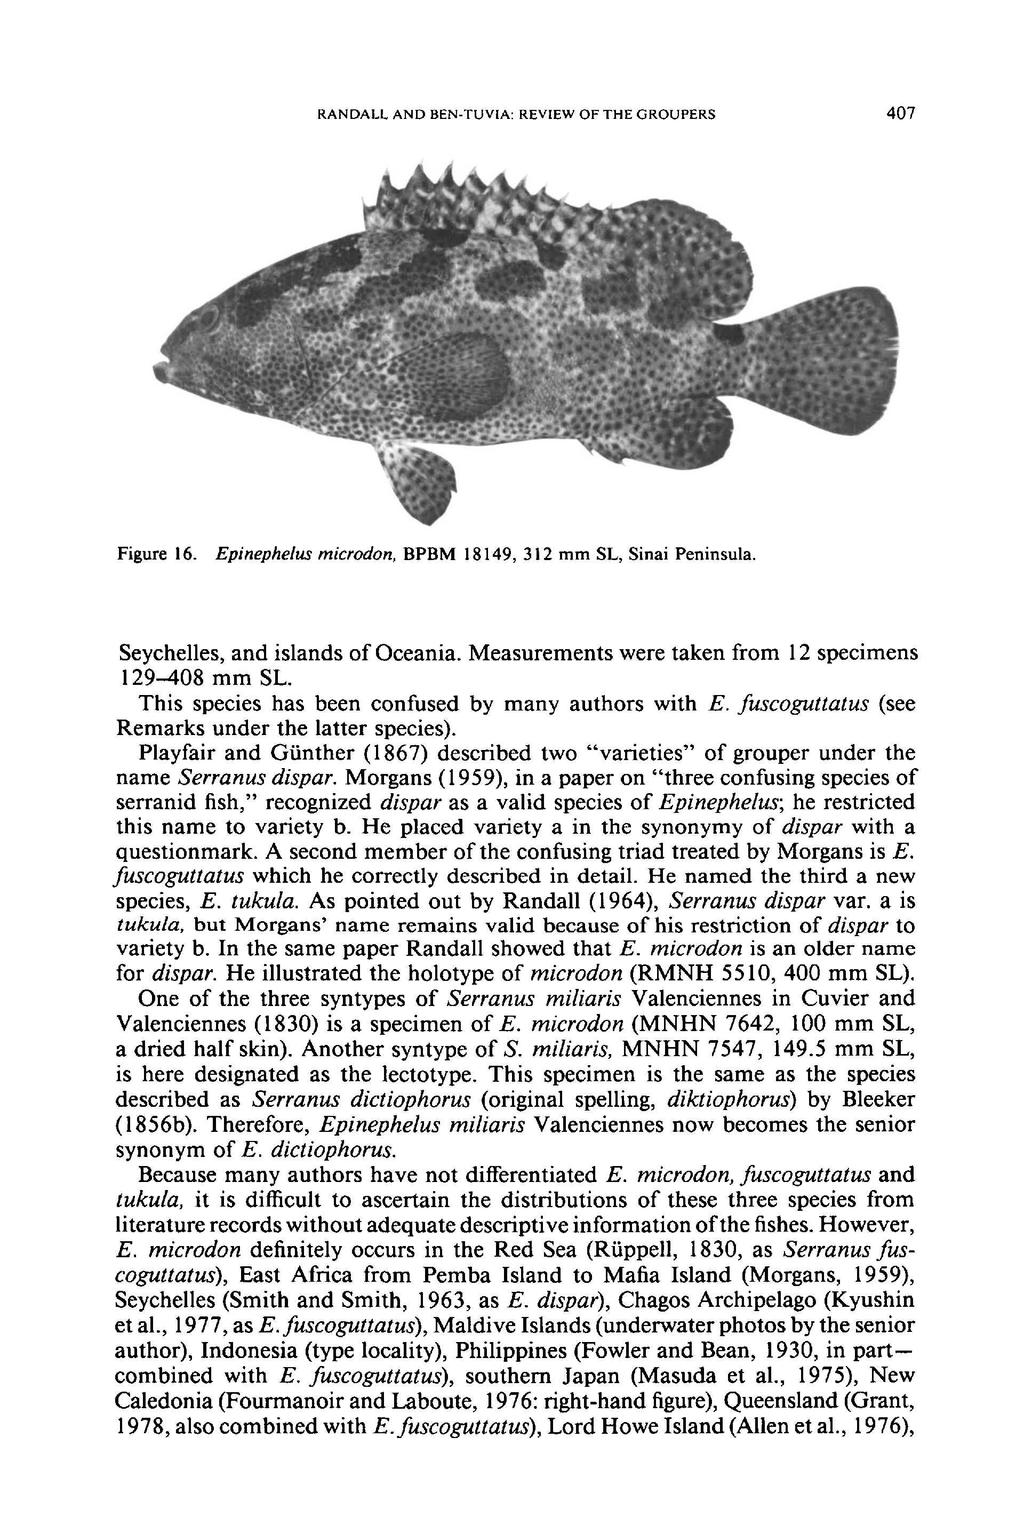 RANDALL AND BEN-TUVIA: REVIEW OF THE GROUPERS 407 Figure 16. Epinephelus microdon, BPBM 18149, 312 mm SL, Sinai Peninsula. Seychelles, and islands of Oceania.